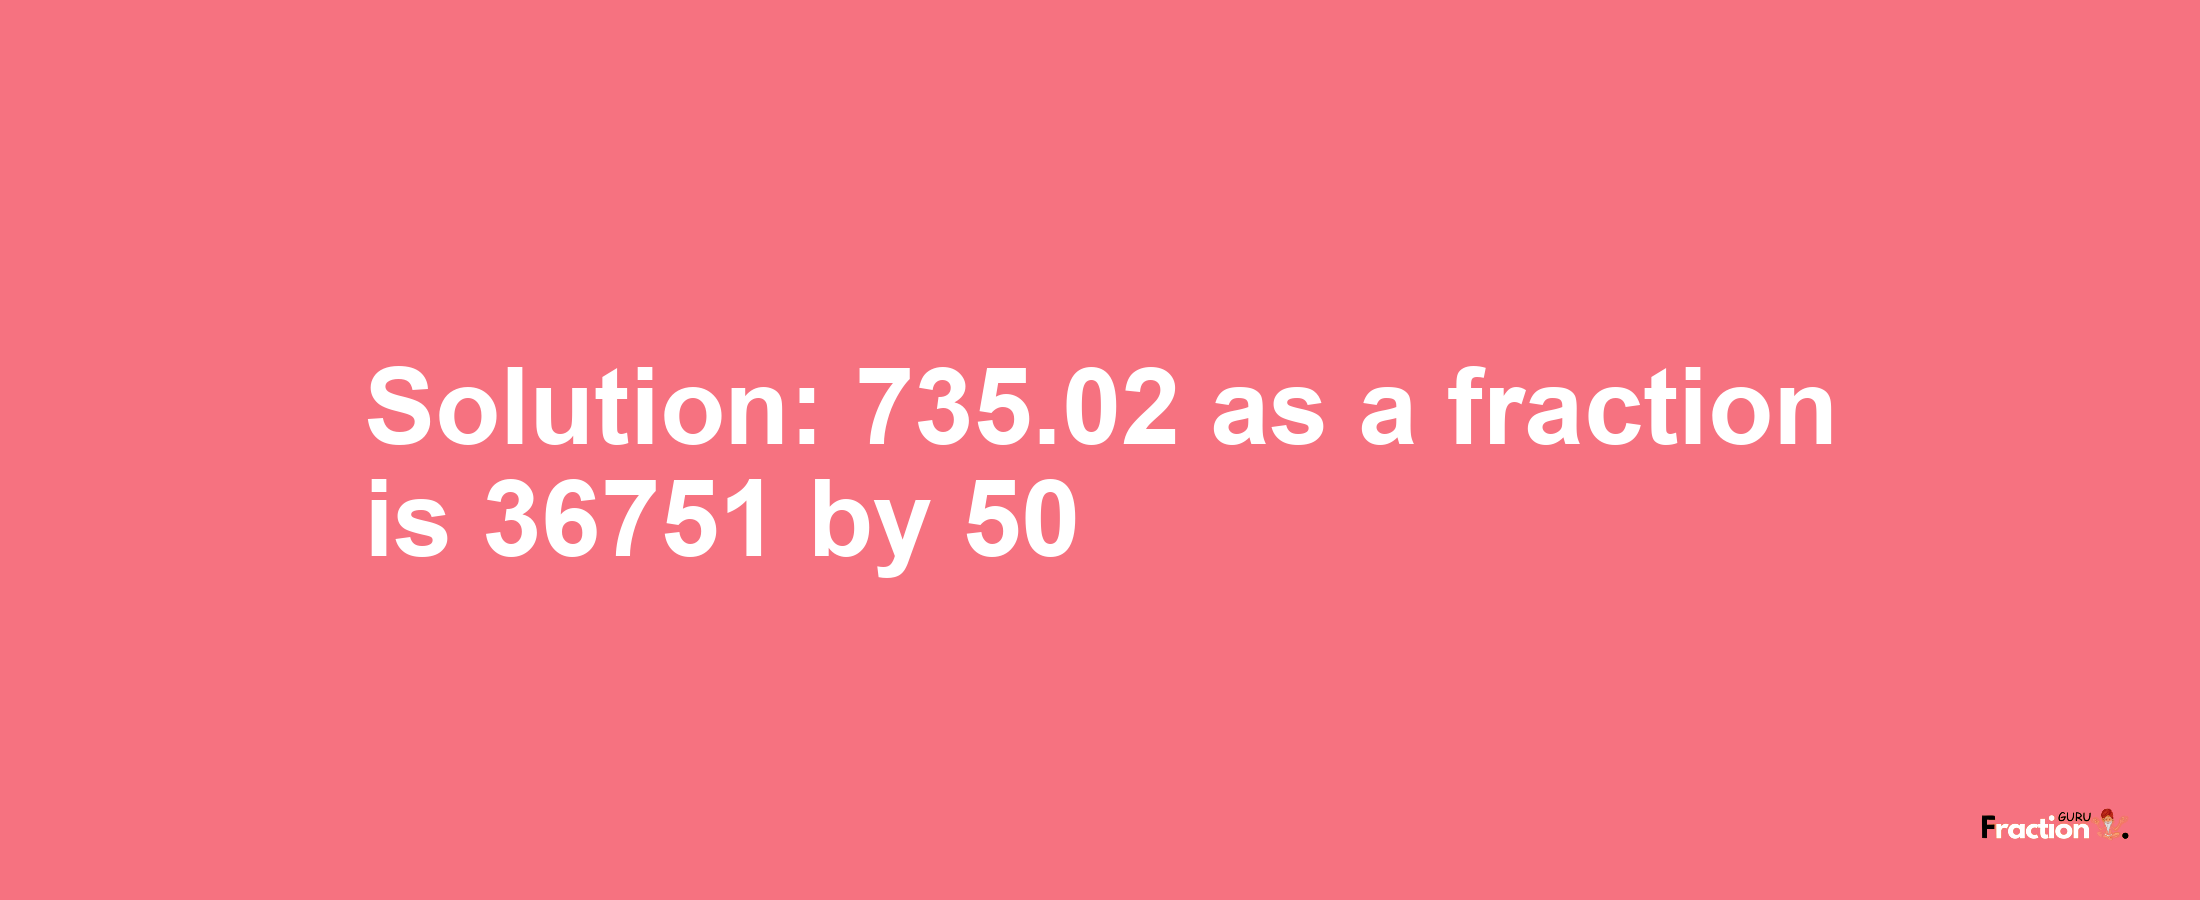 Solution:735.02 as a fraction is 36751/50